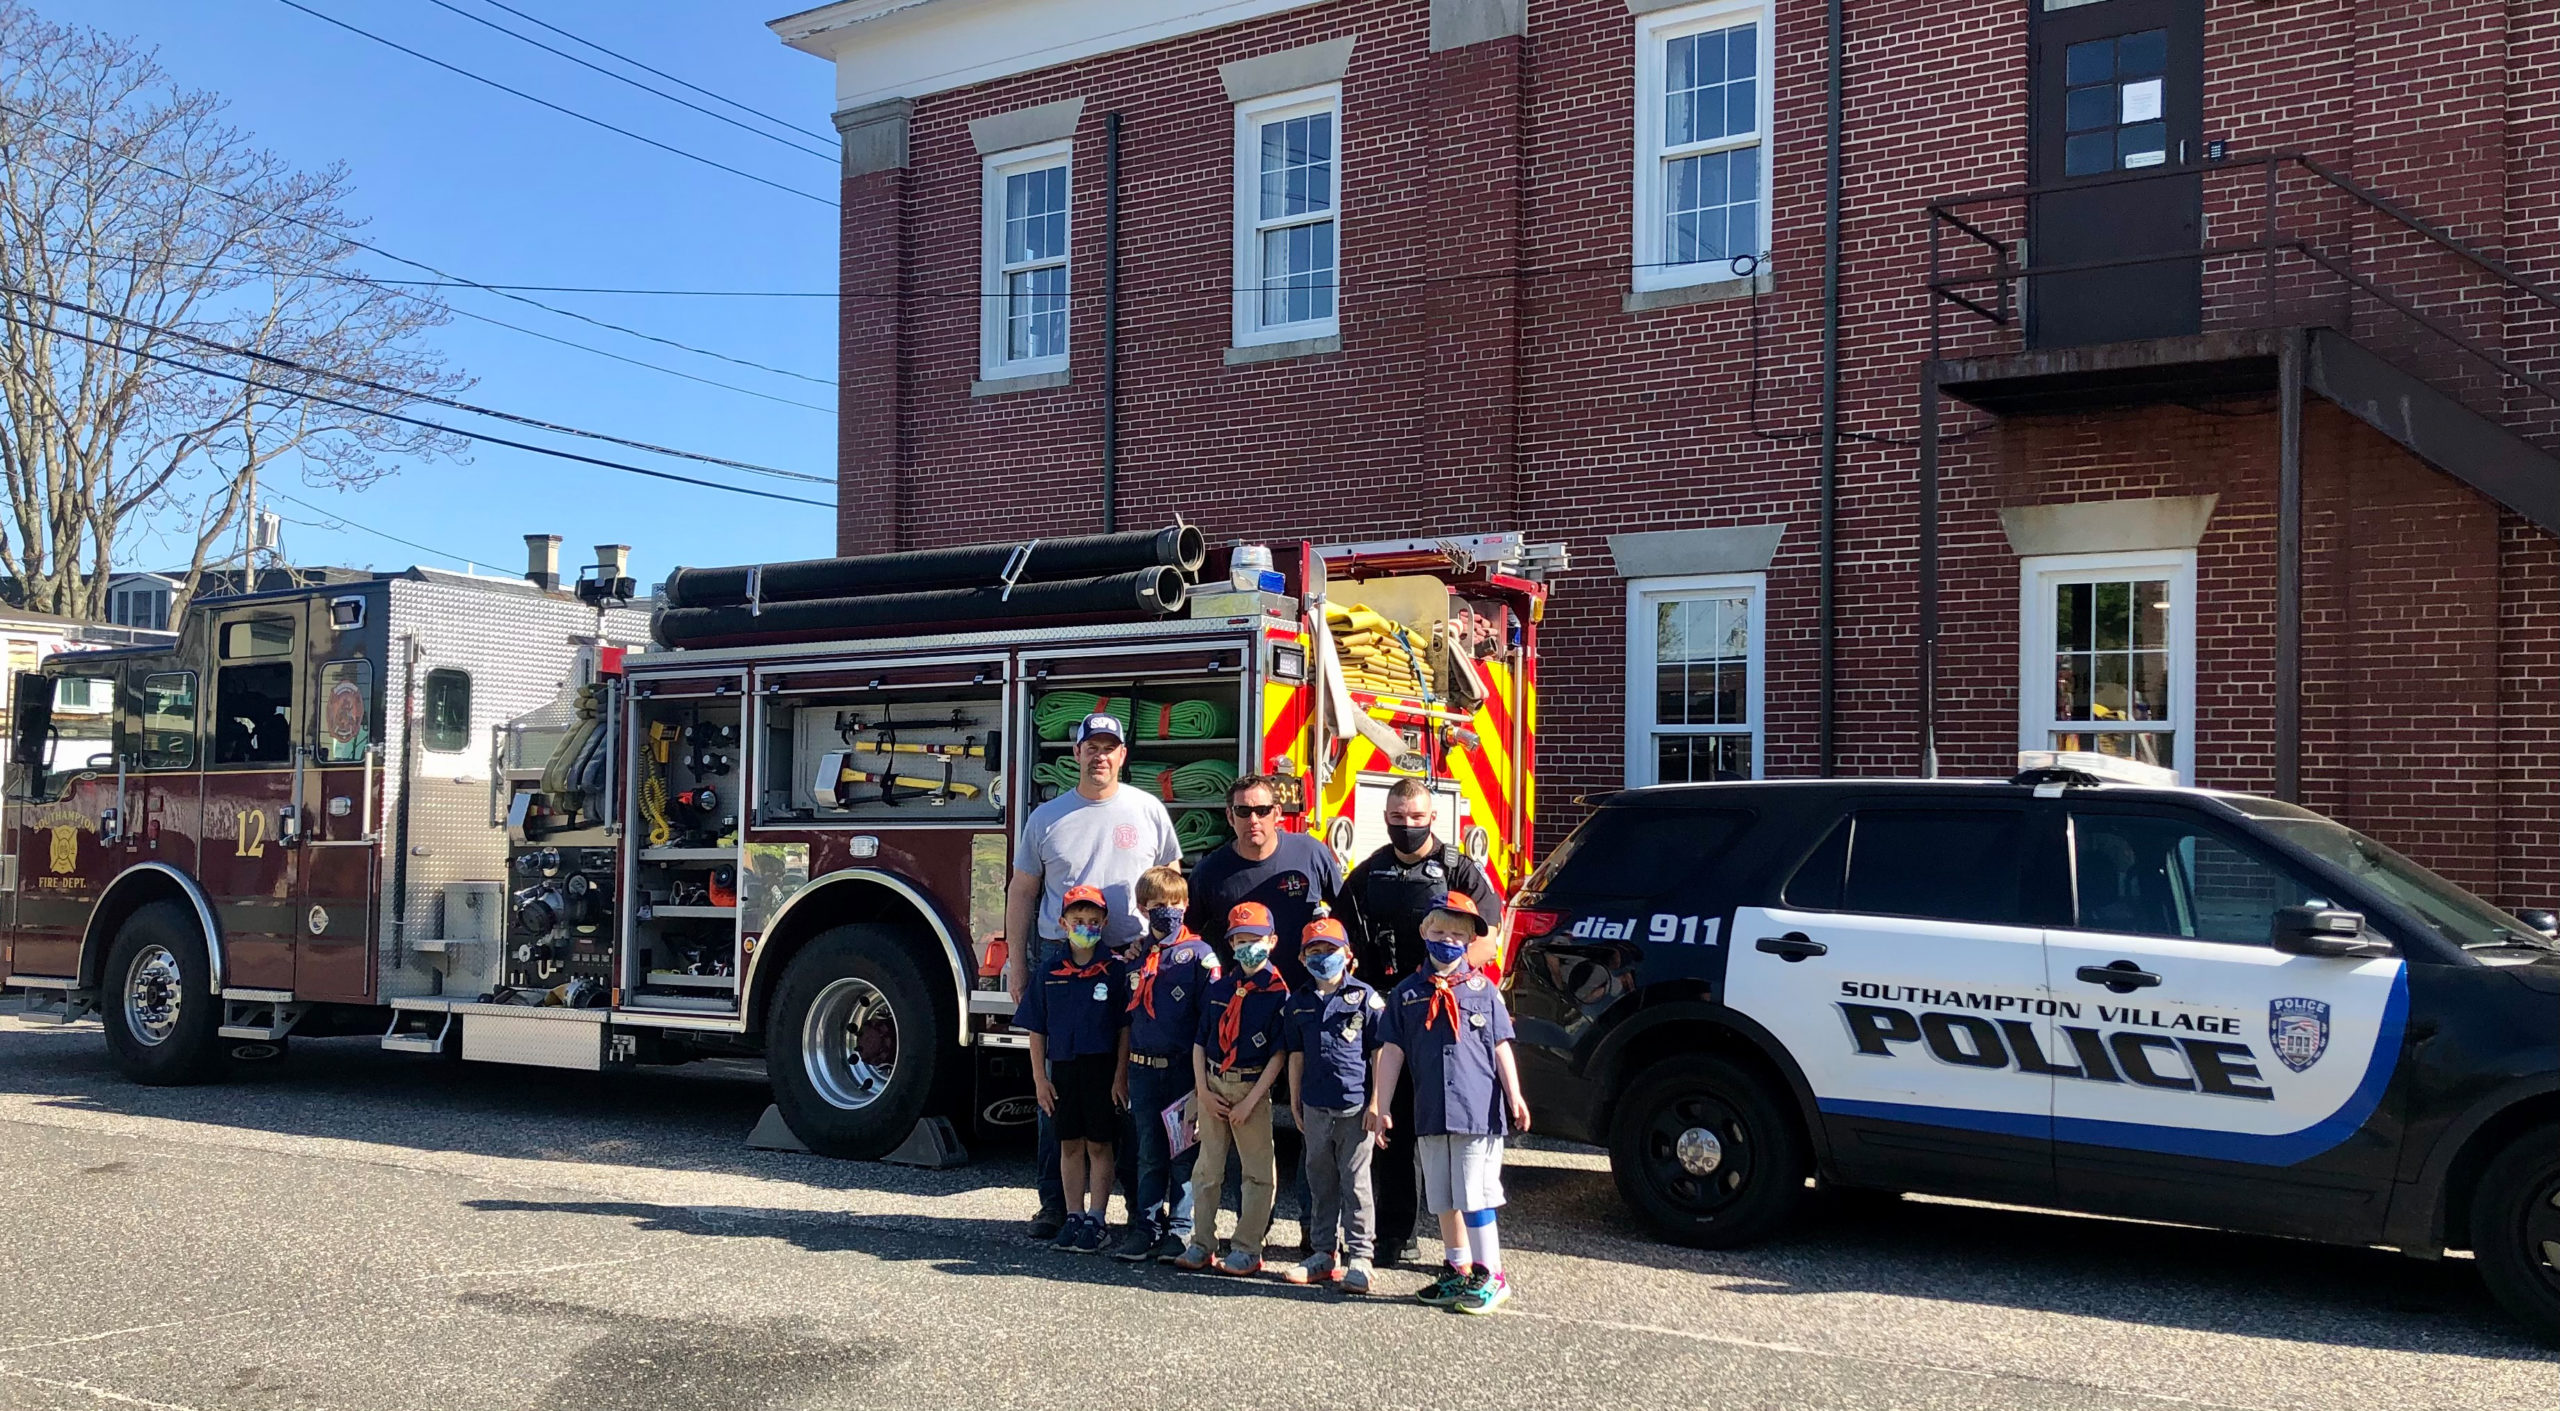 Cub Scout Pack 14 Tiger Den visited with members of Southampton Fire Department, Southampton Village Volunteer Ambulance, and Southampton Village Police Department on Friday to learn about the emergency services and earn the Tiger Safe and Smart achievement.
Back row, left to right, Chris Capalbo, Gene Squires and Kyle McGuiness. Front row, left to right,  JT Ingram, Thomas Capalbo, Desmond O’Leary, Cole D’Italia and Tavin Tietjen.            COURTESY CHRIS CAPALBO